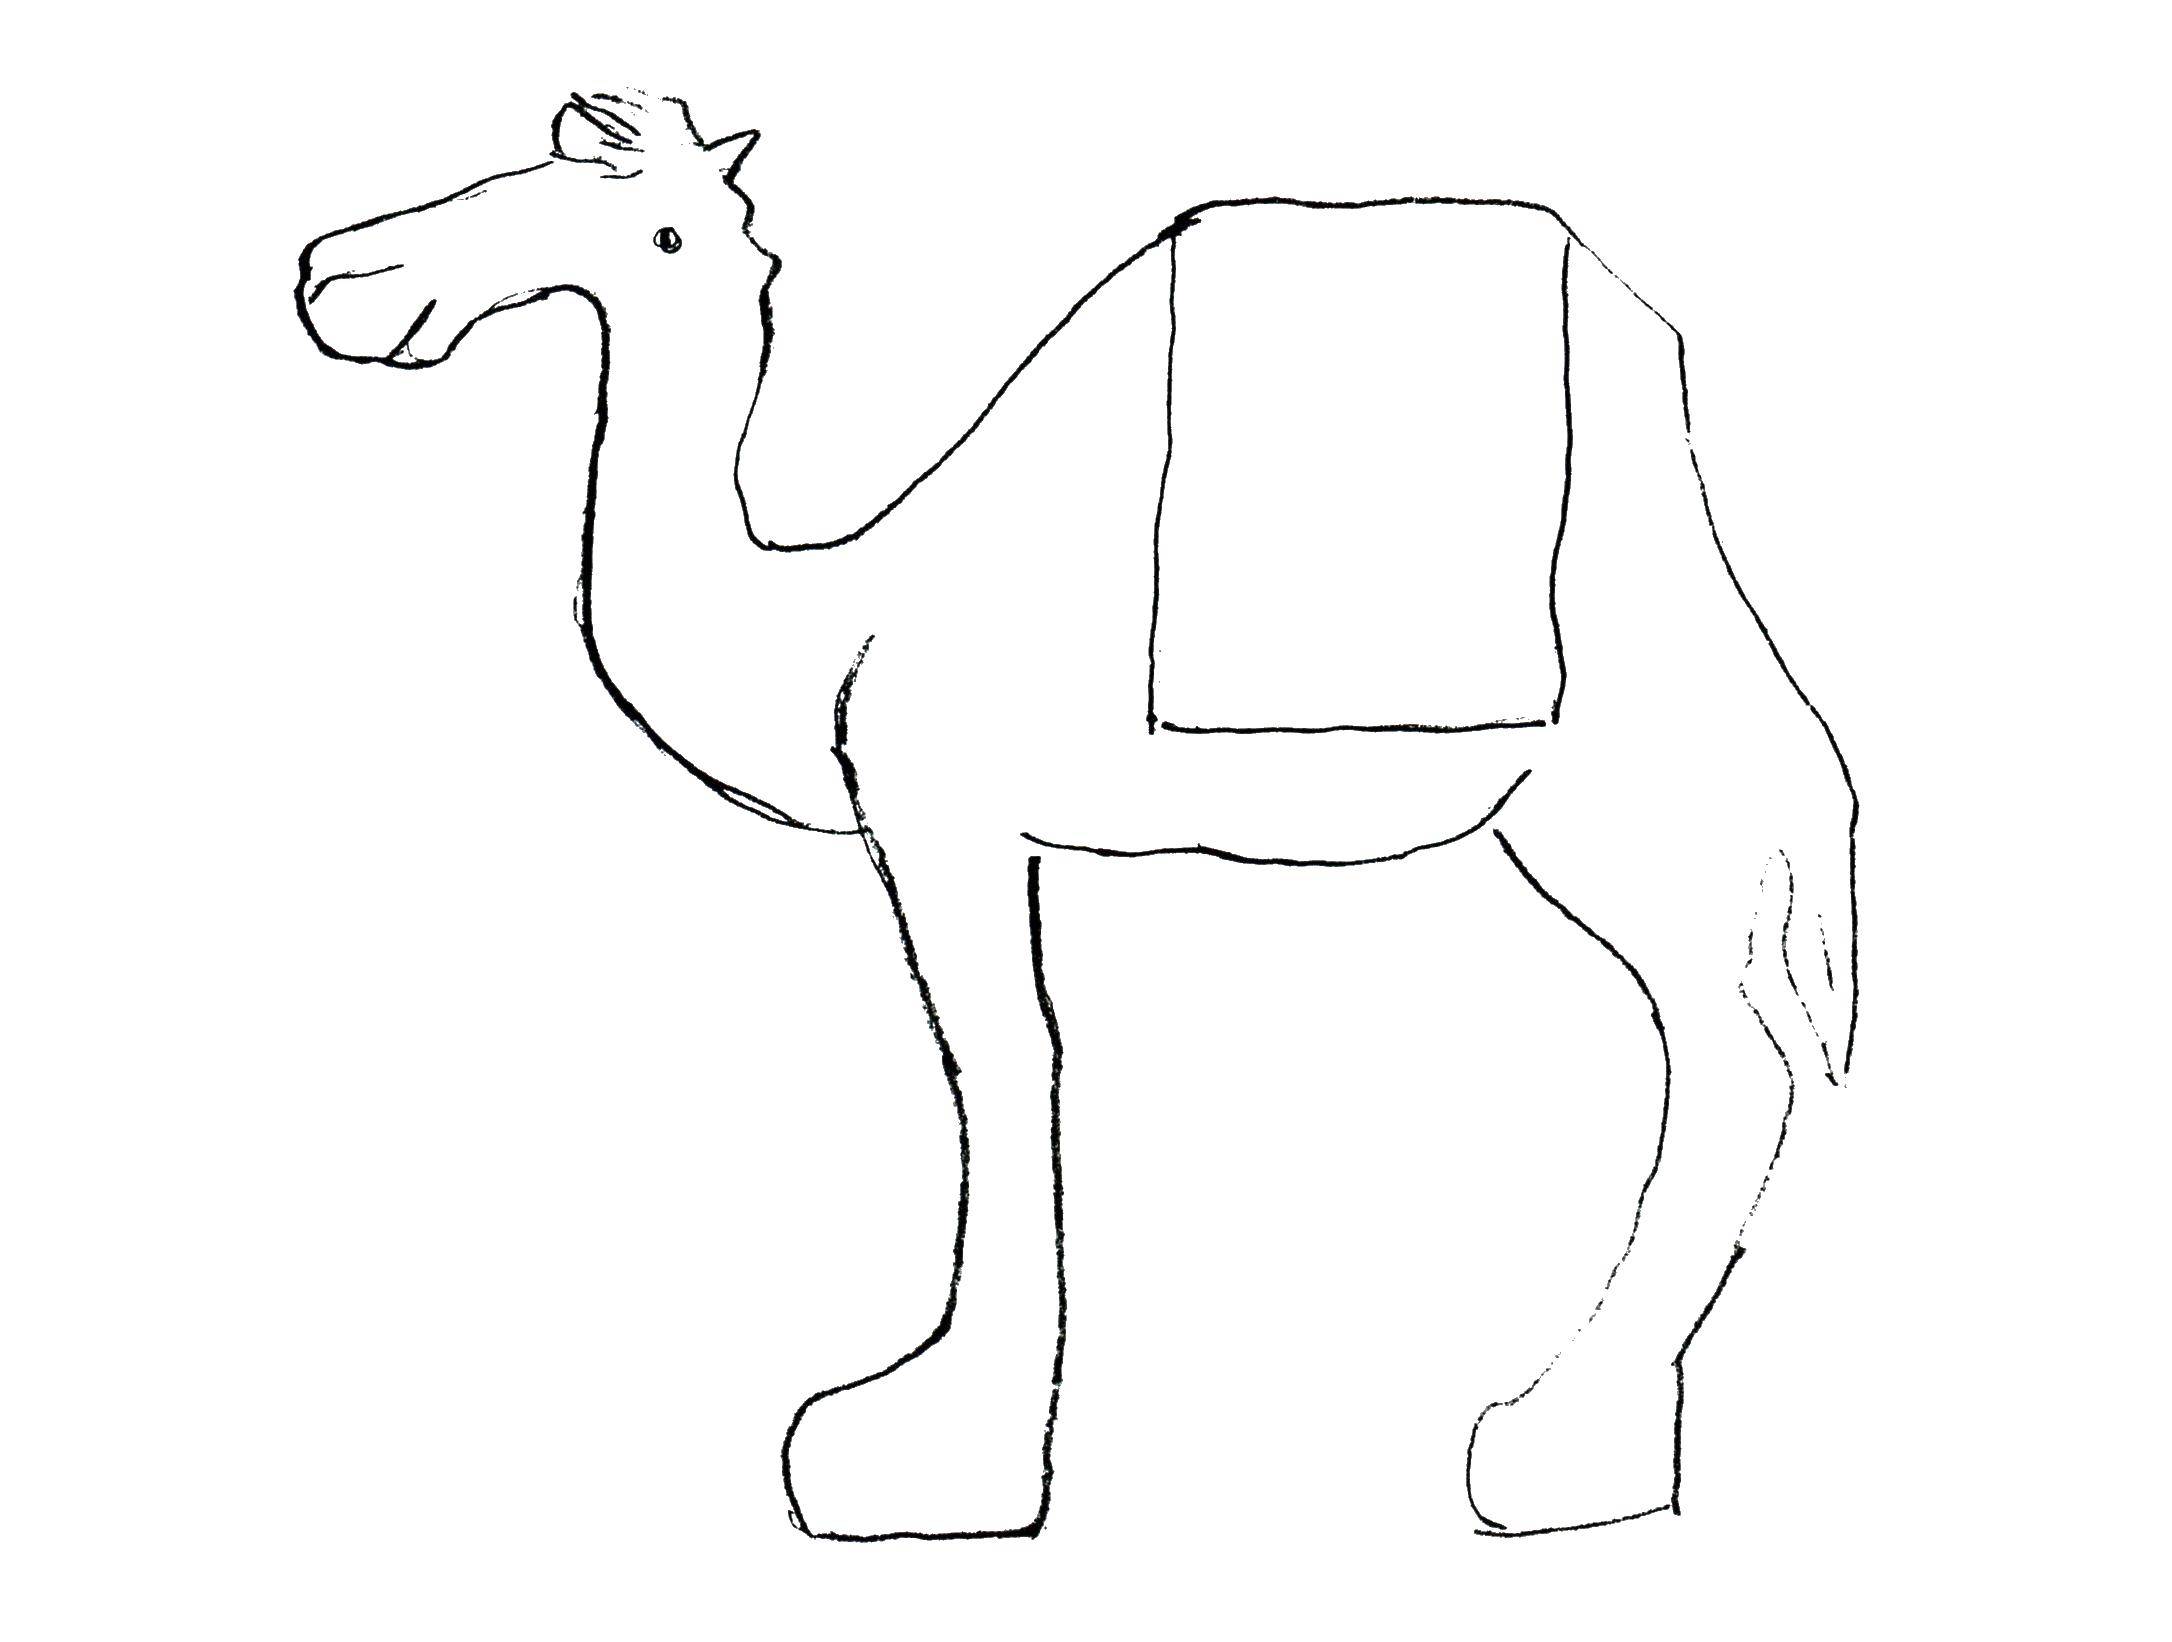 Coloring The one-humped camel. Category coloring. Tags:  Camel, desert.